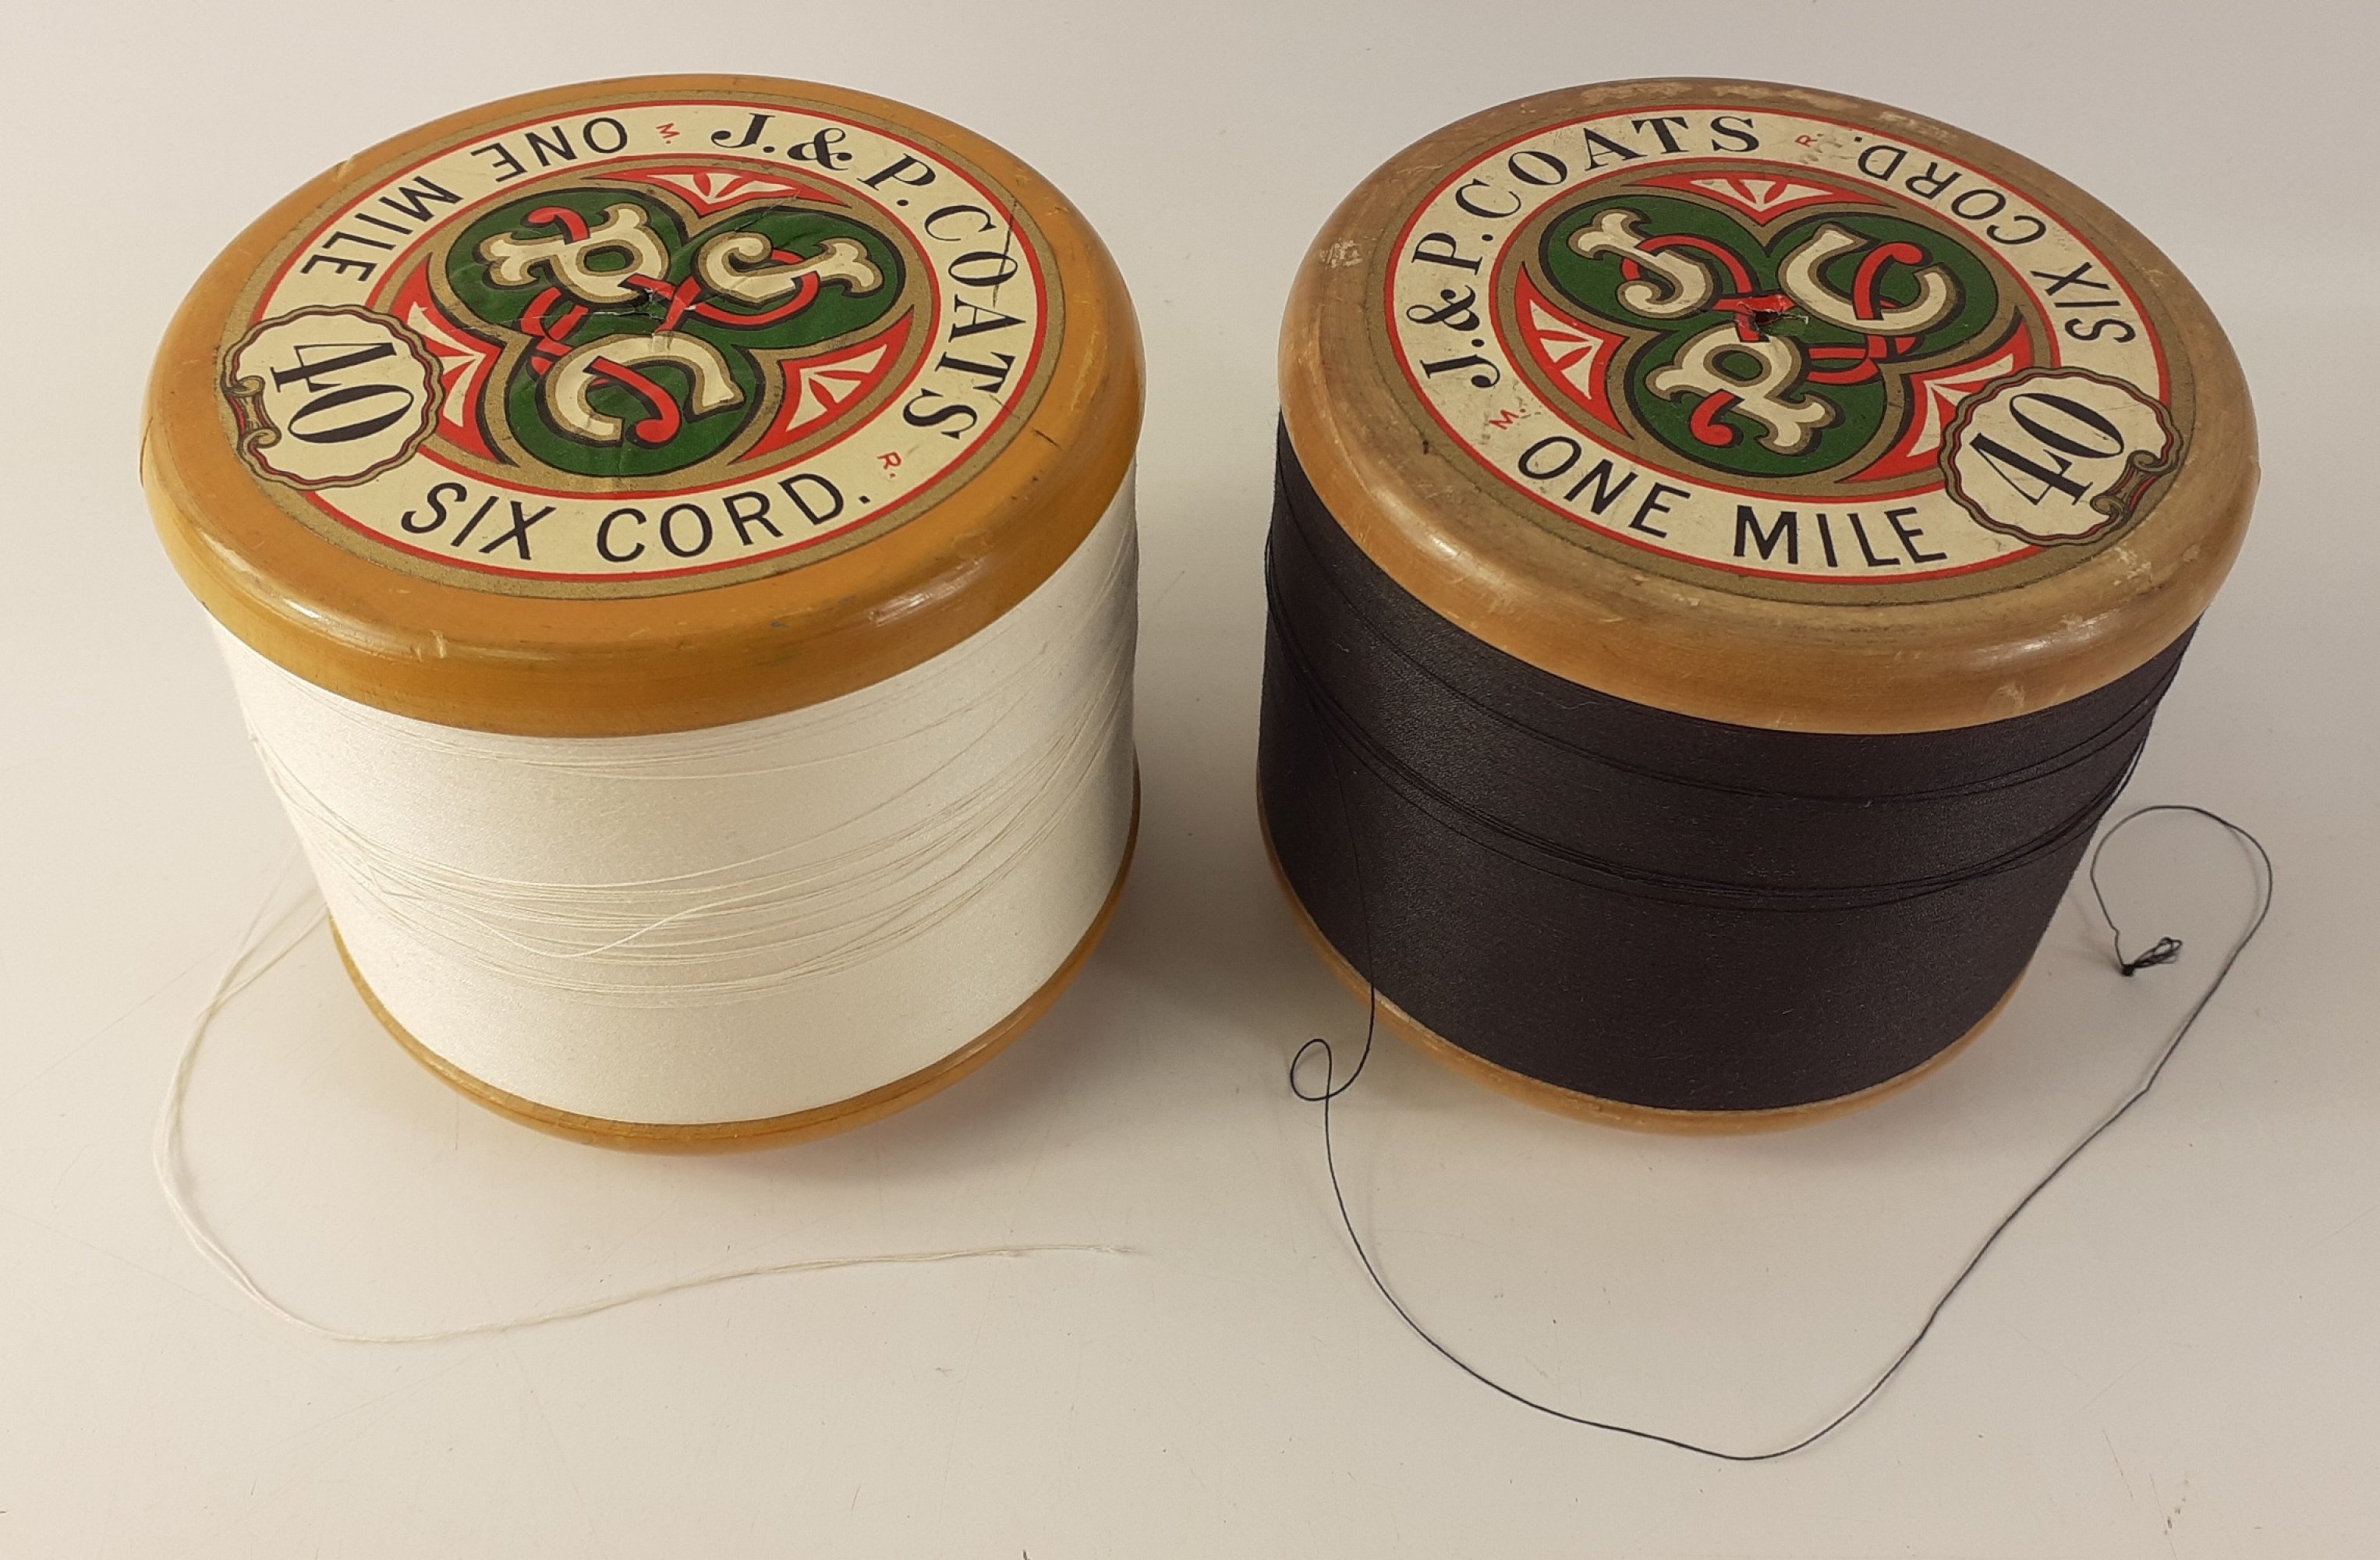 Rare to find - two J&P Coats one mile bobbins with white and black 6 cord thread